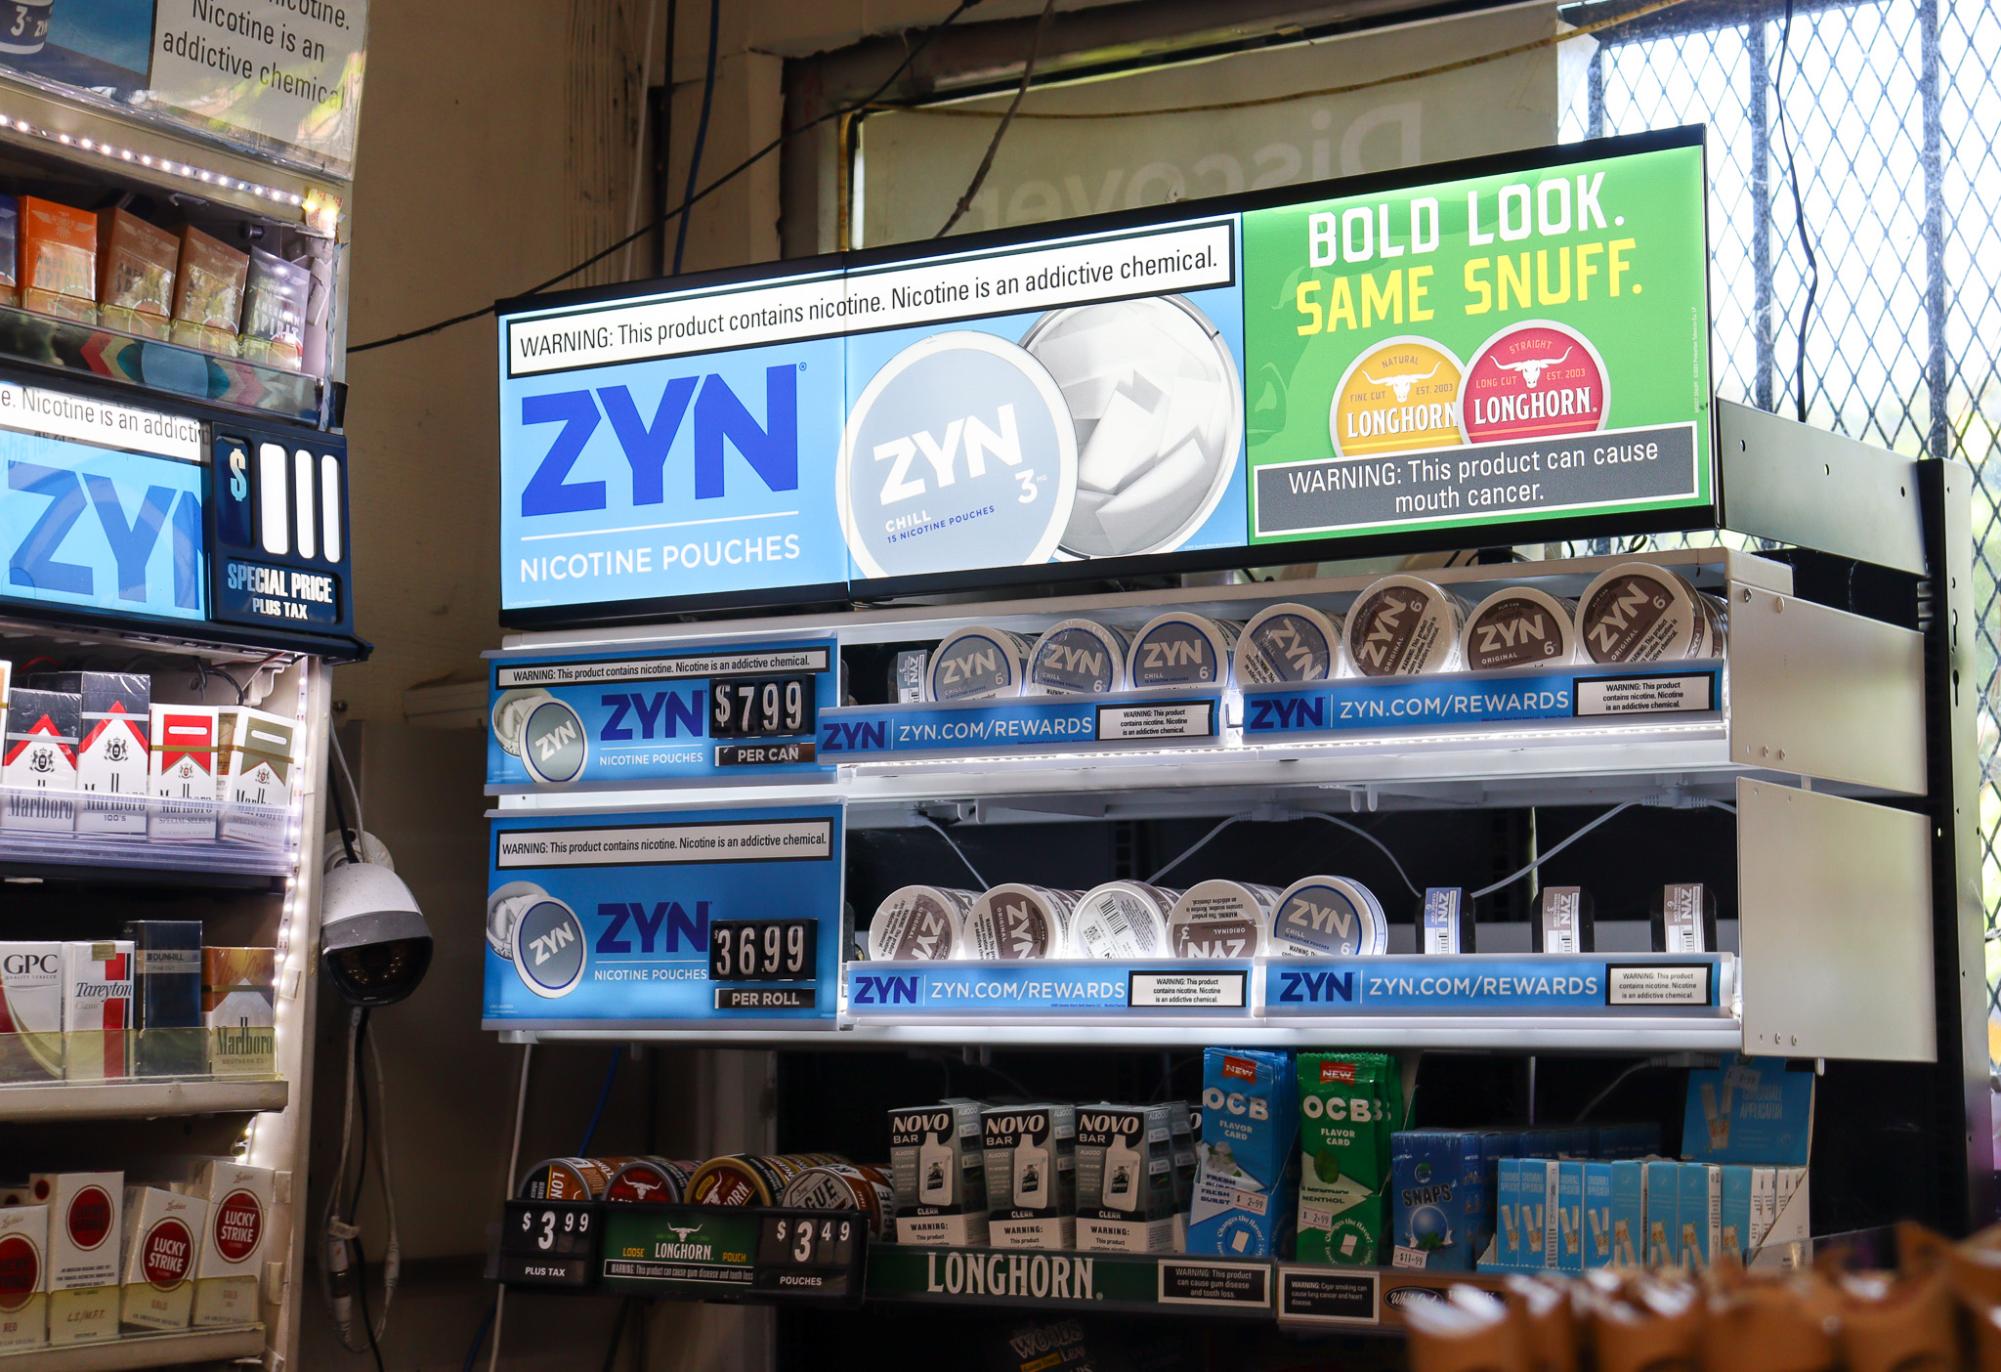 Zyn nicotine pouches on sale for adults 21+ at Gs Liquor in Fairfax.